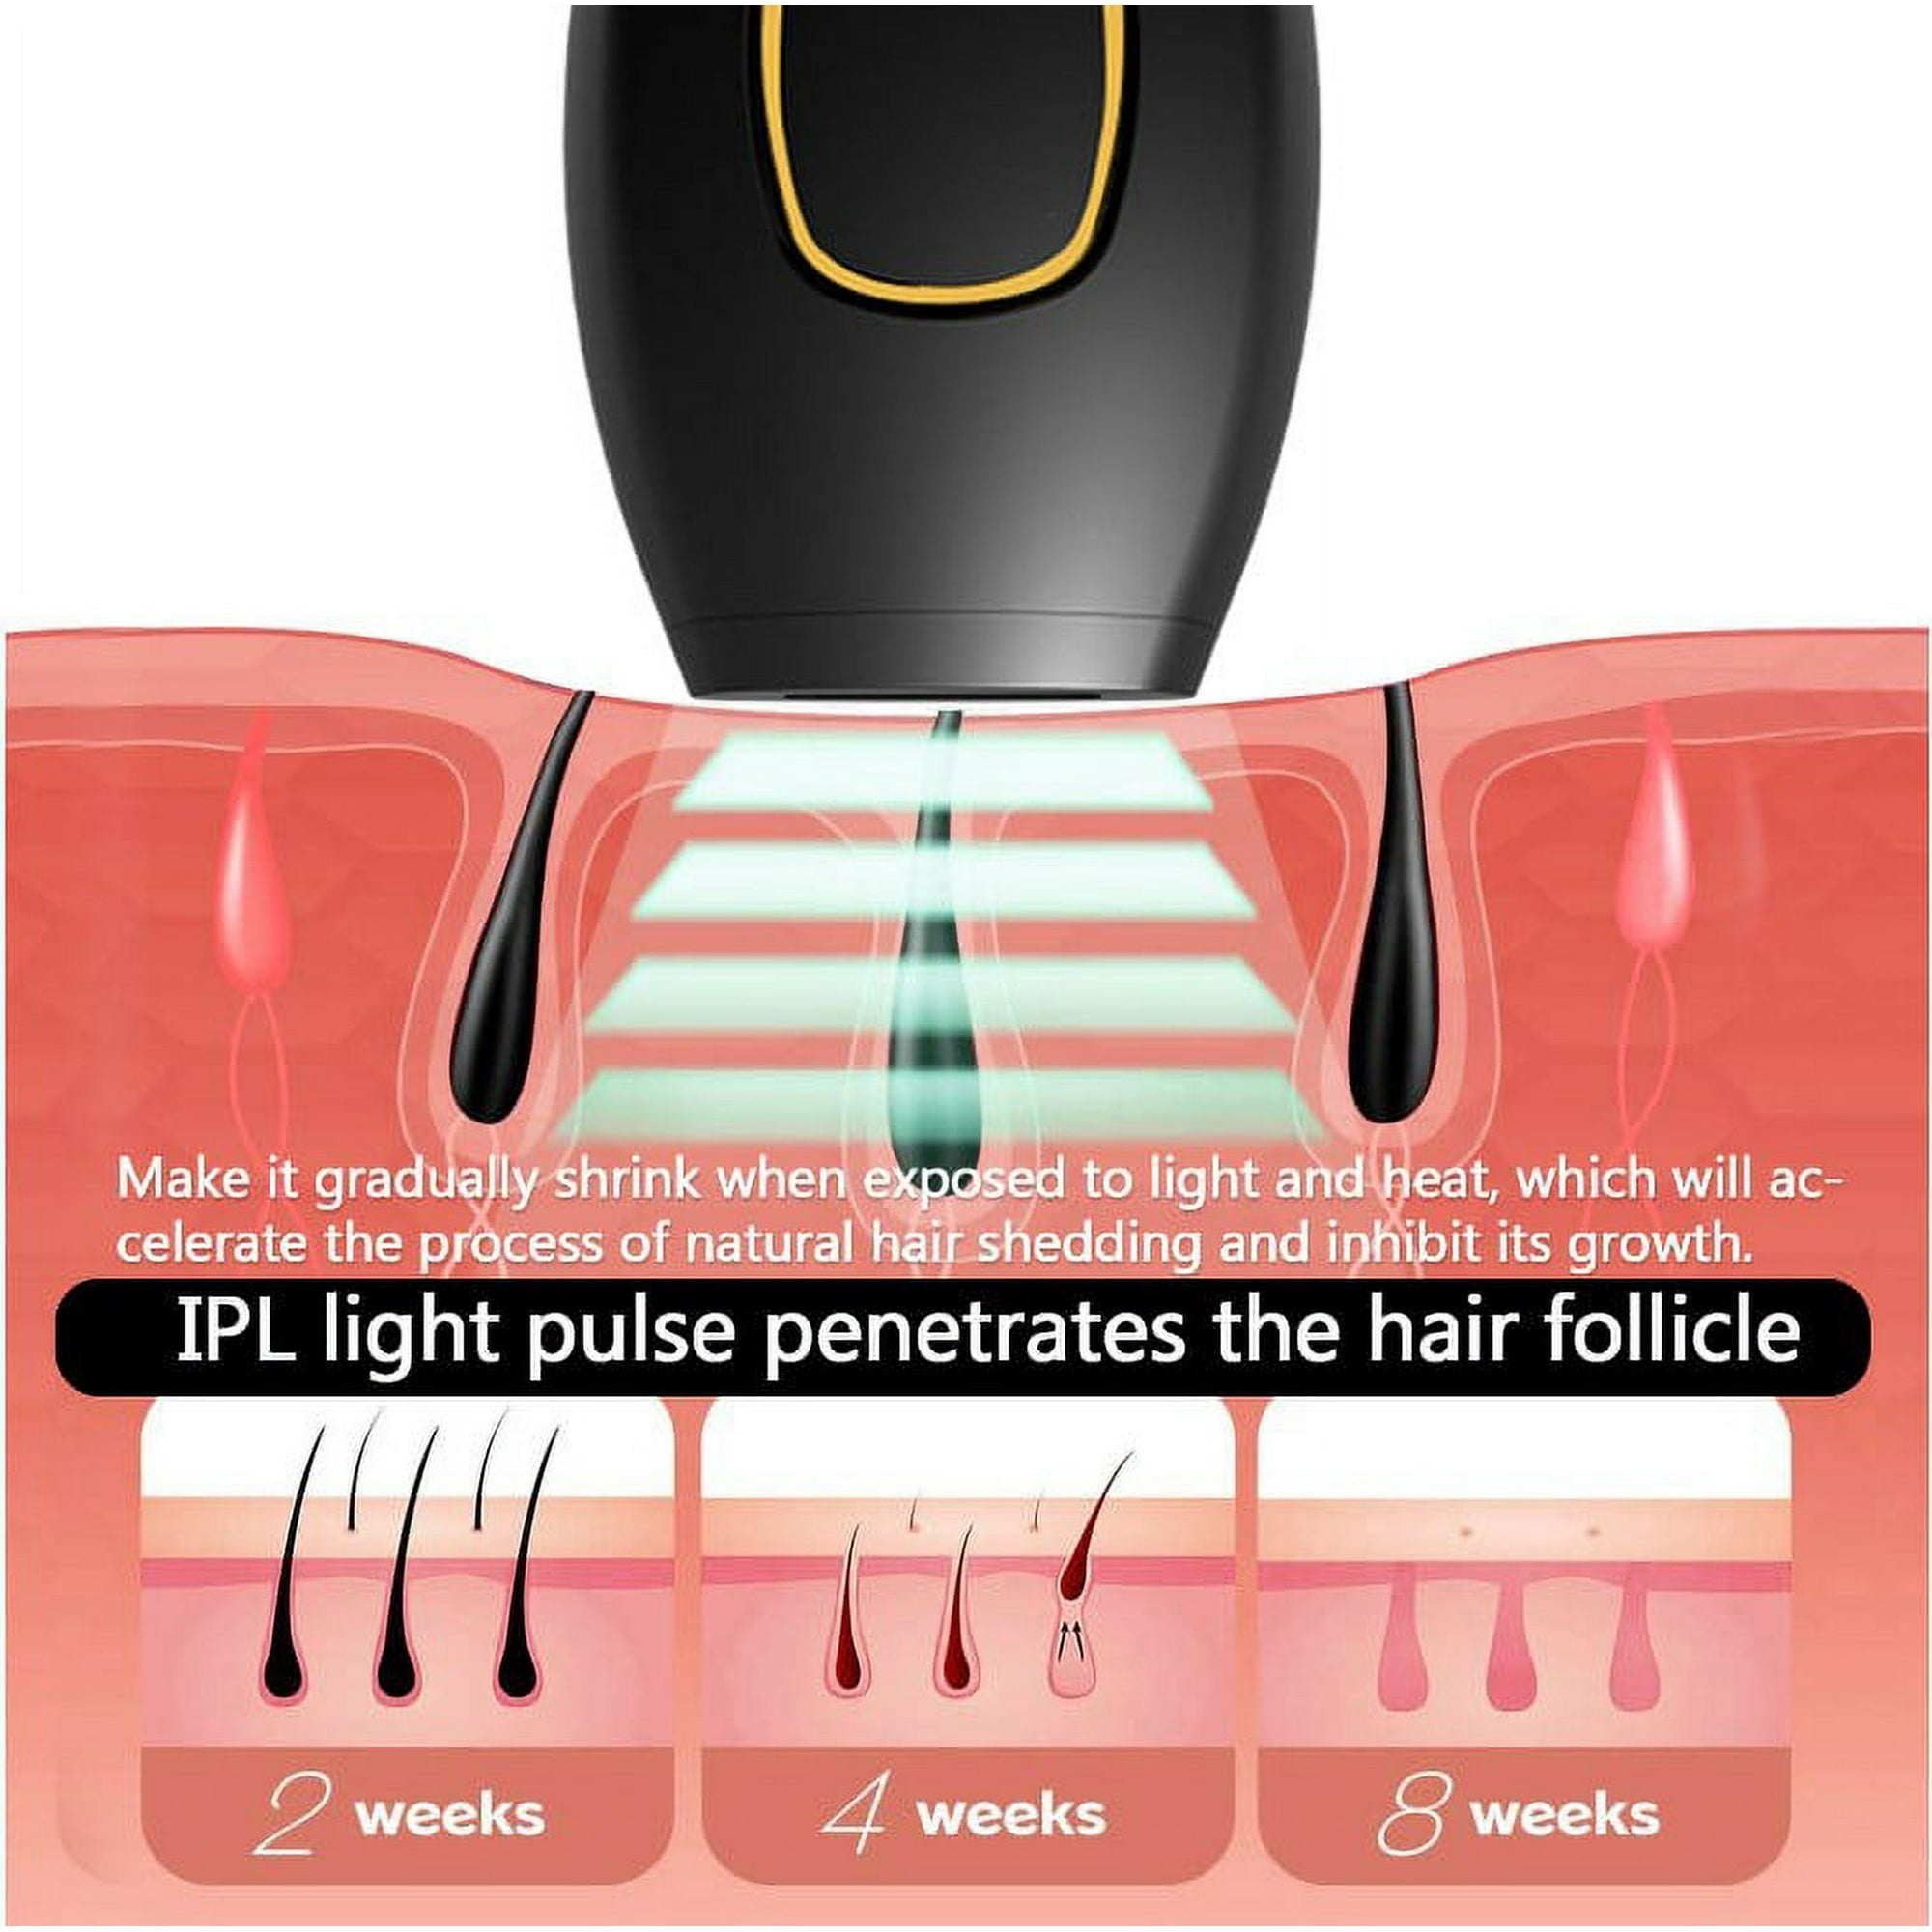 IPL - Laser Hair Removal at Home